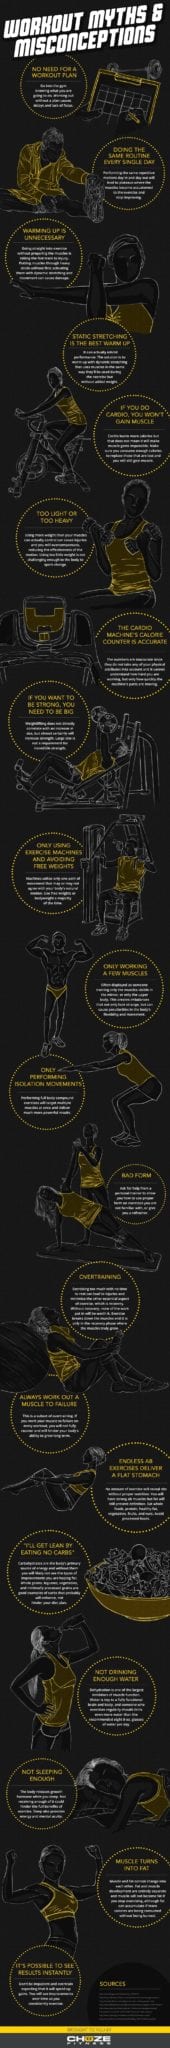 Workout Myths & Misconceptions - an Infographic